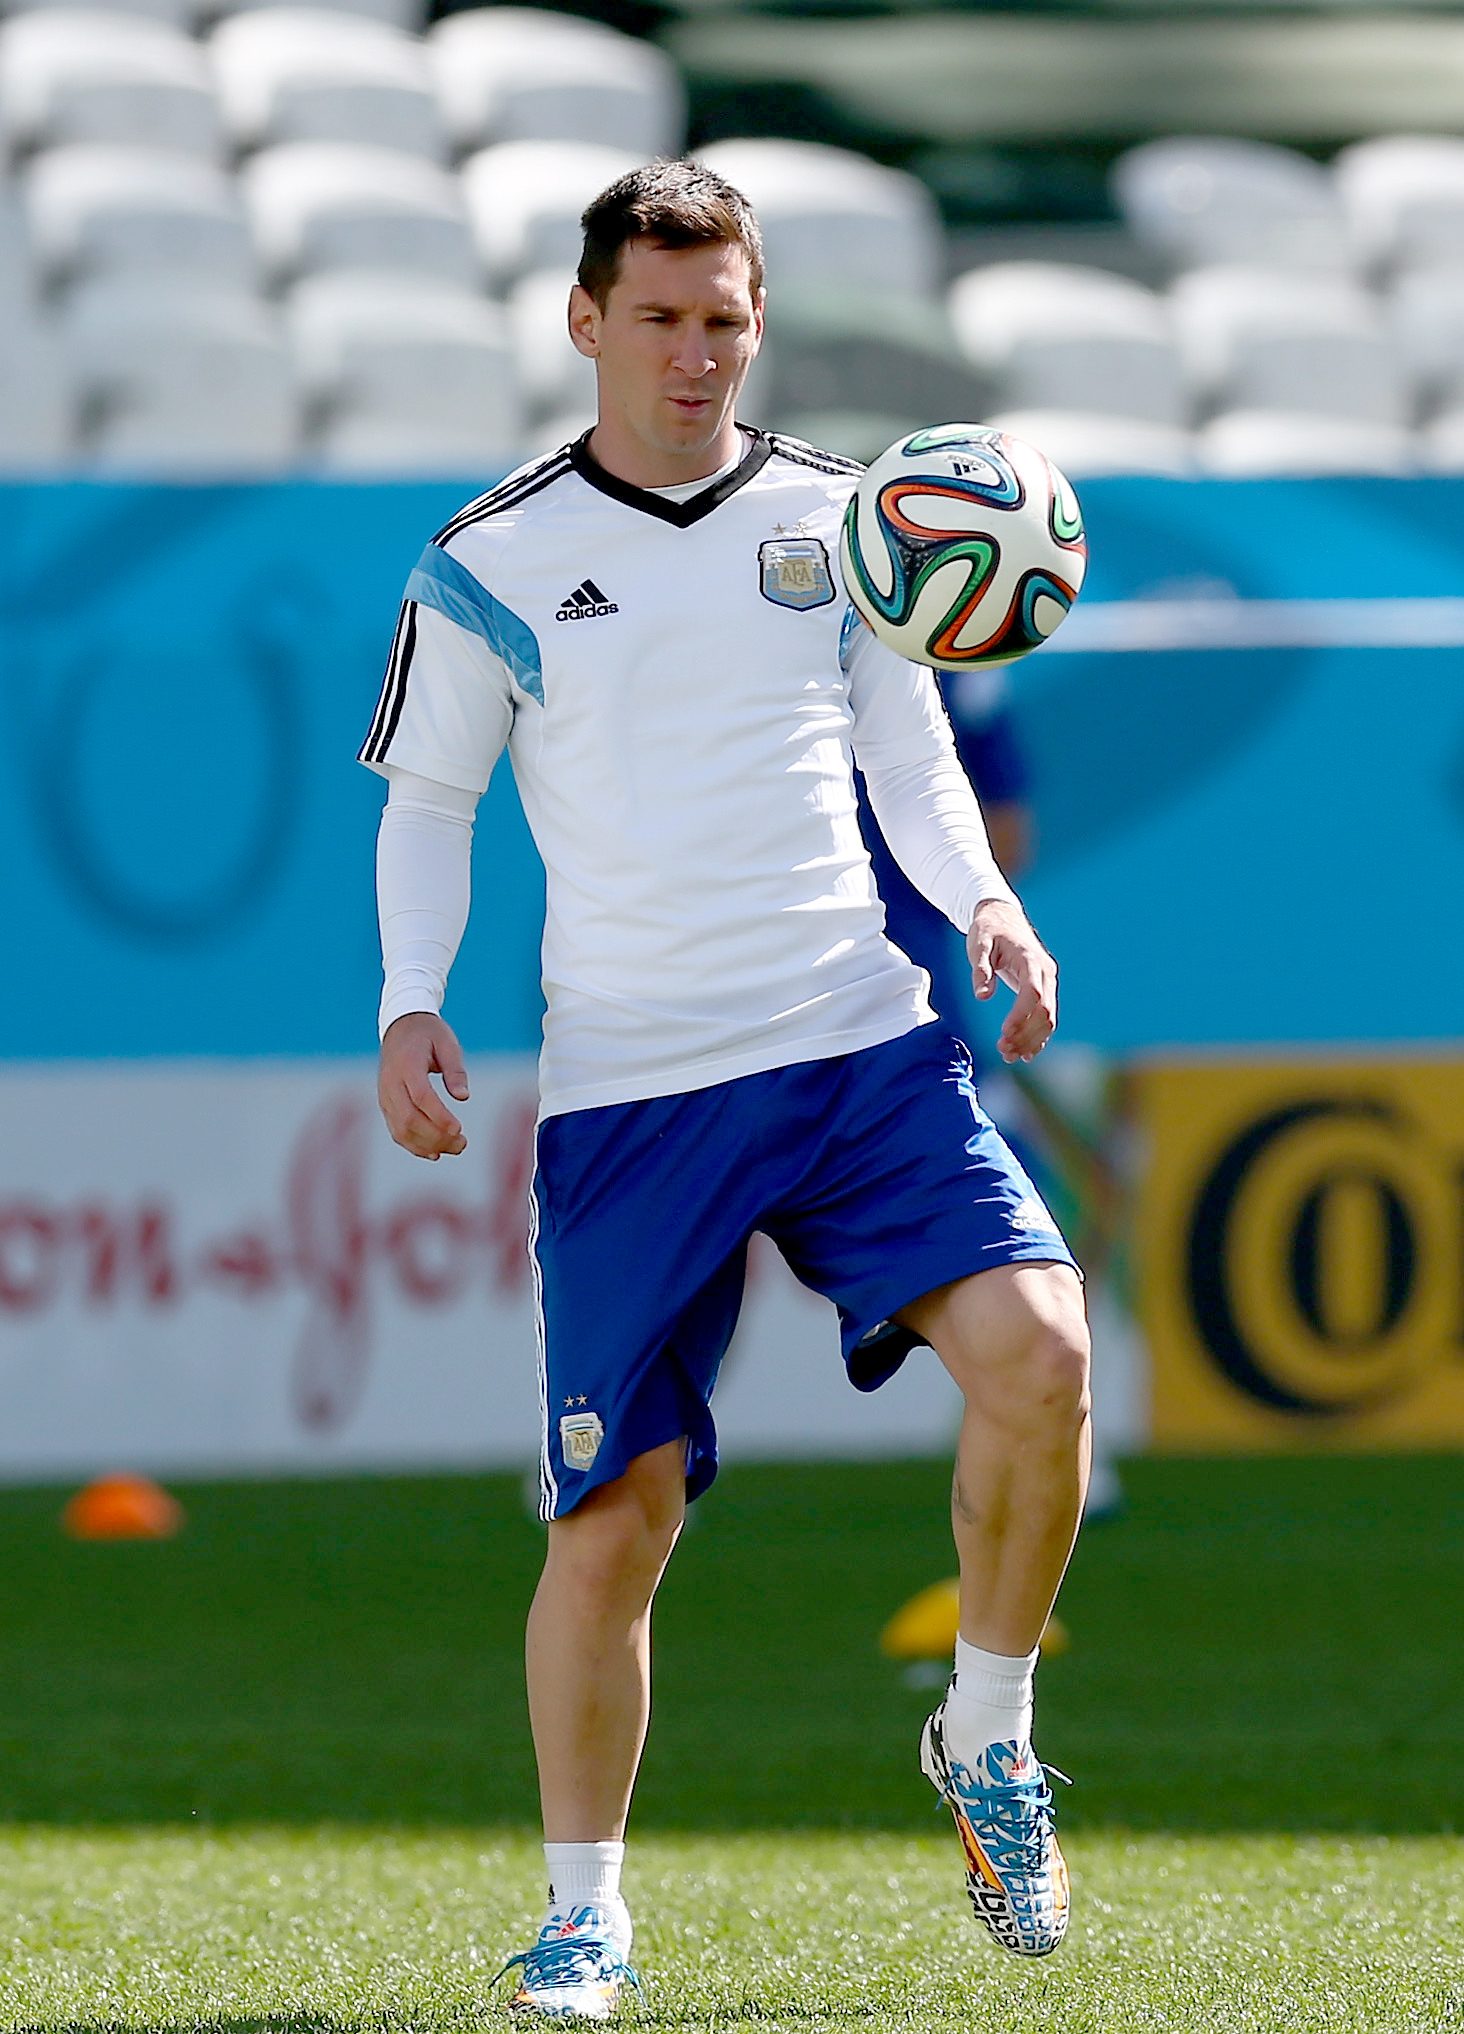 PHOTO: Lionel Messi of Argentina during a training session at Arena de Sao Paulo, June 30, 2014, in Sao Paulo.